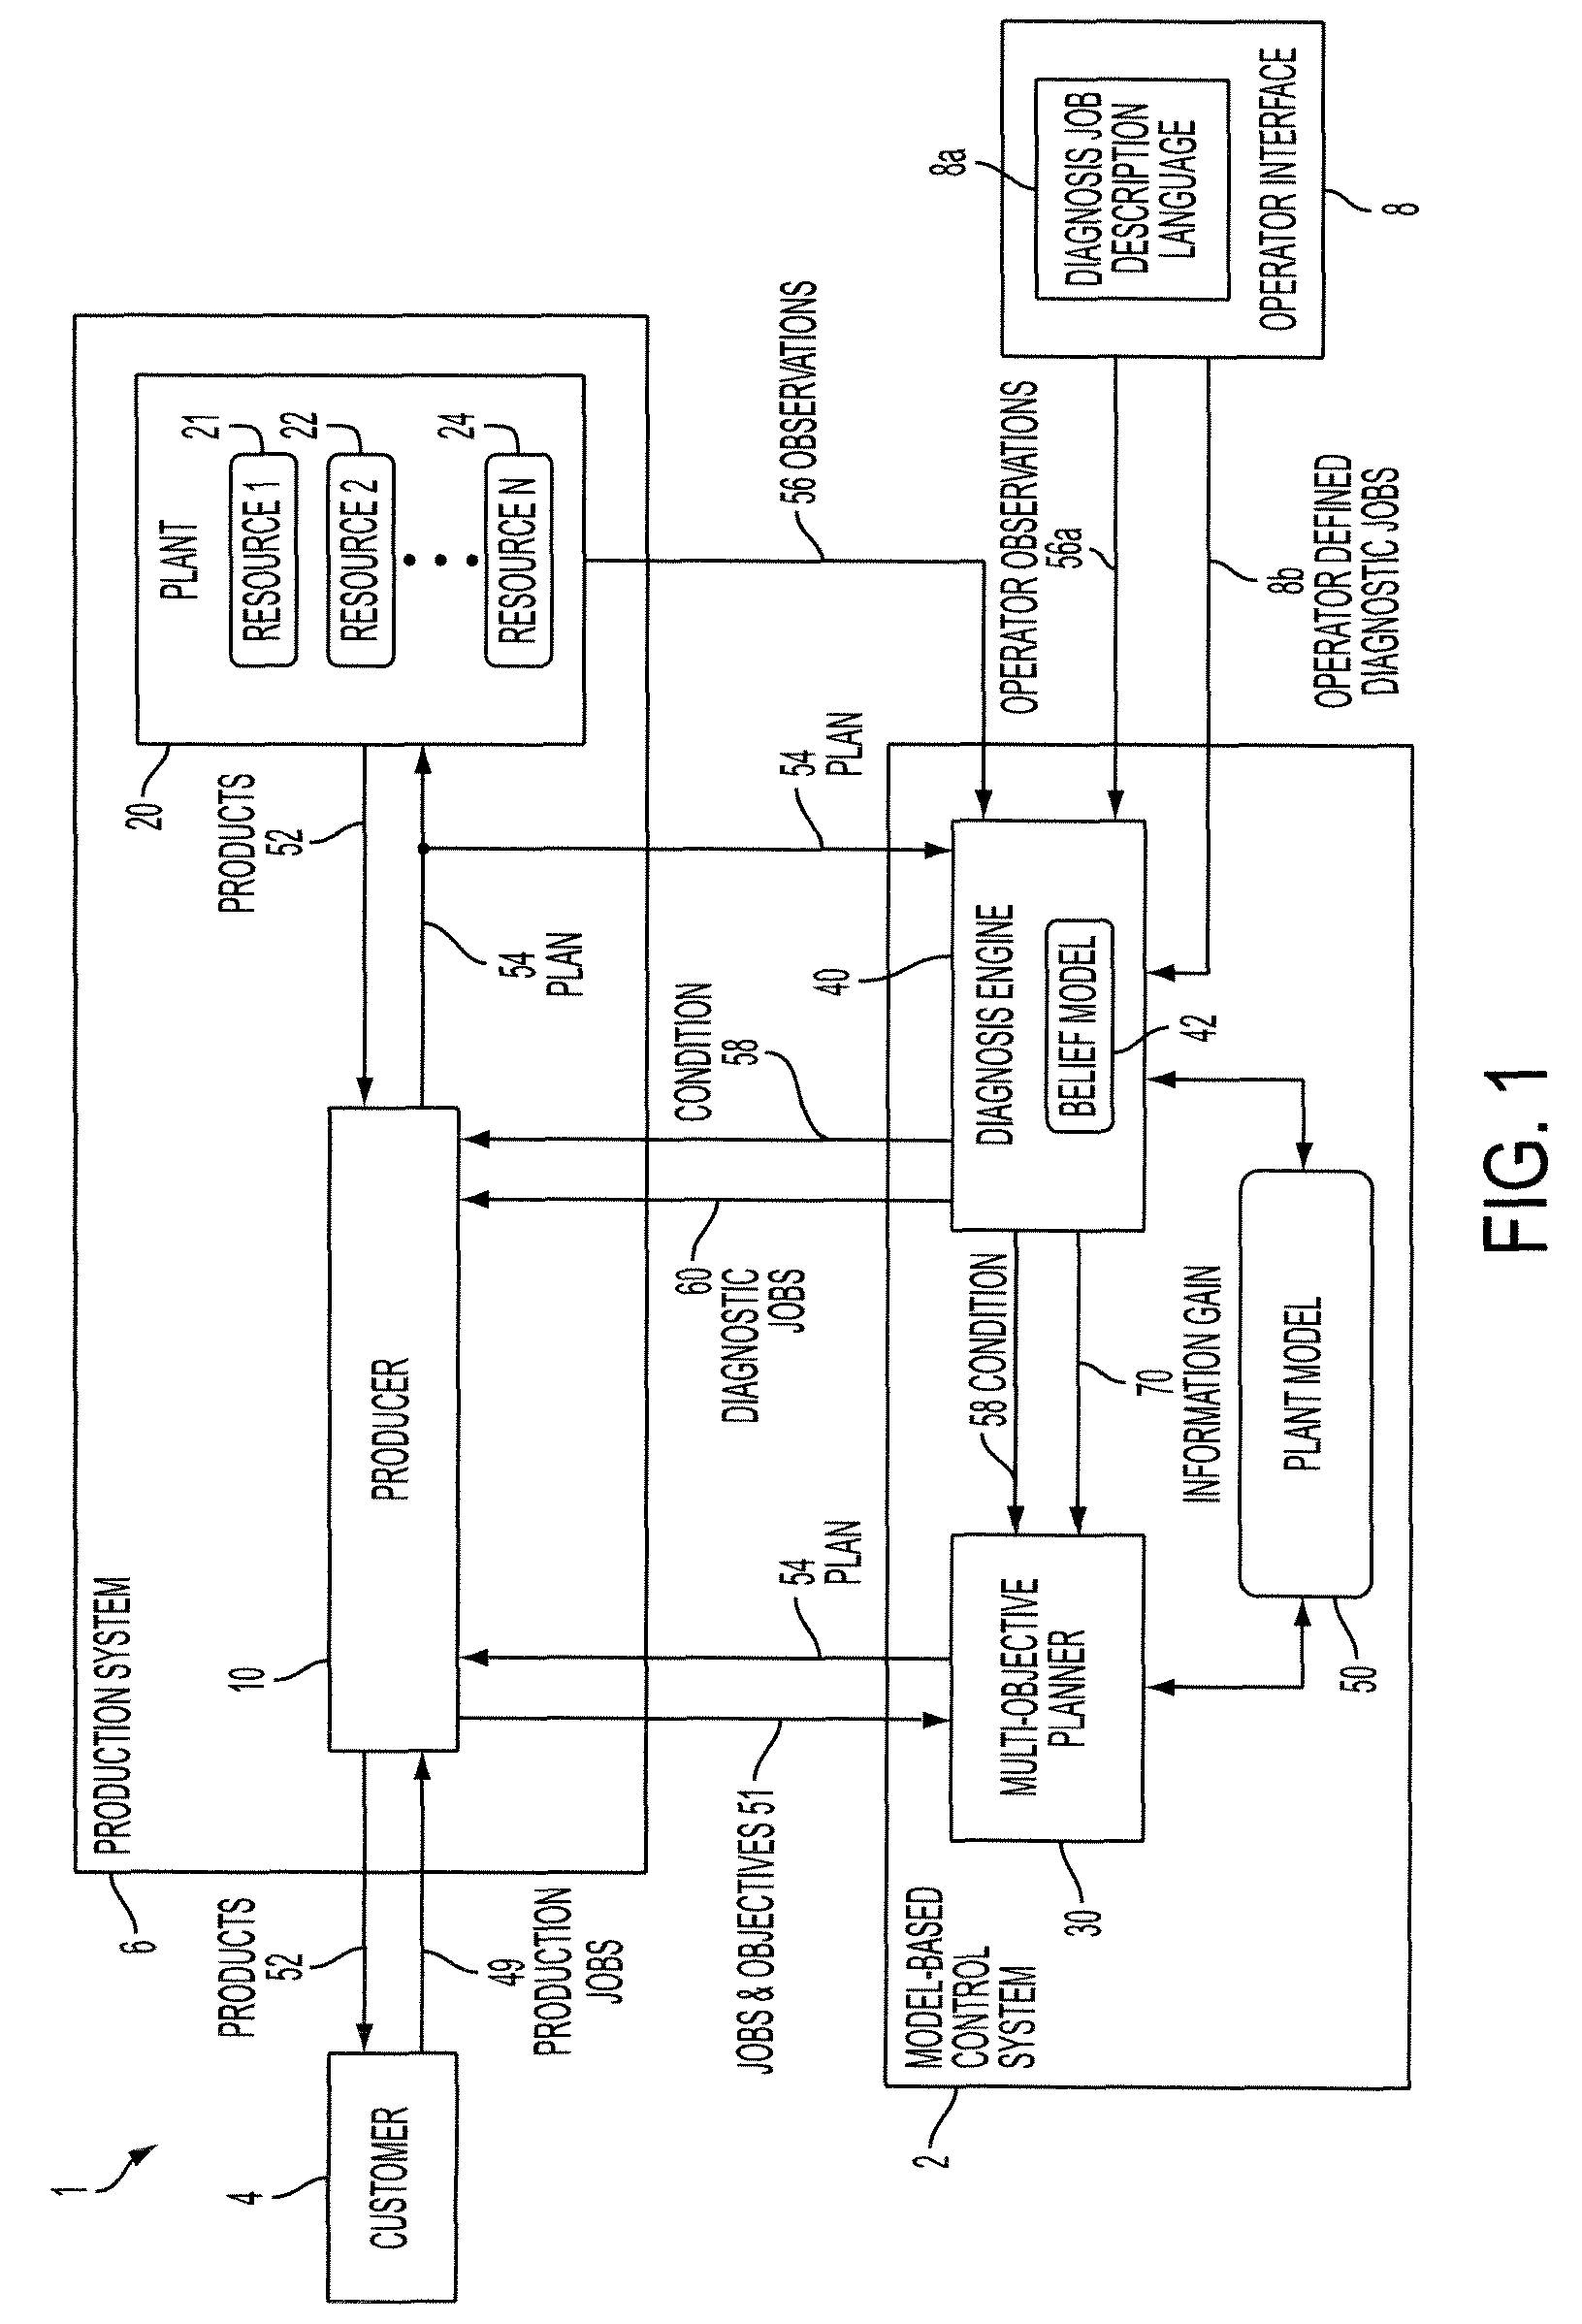 Methods and systems for pervasive diagnostics